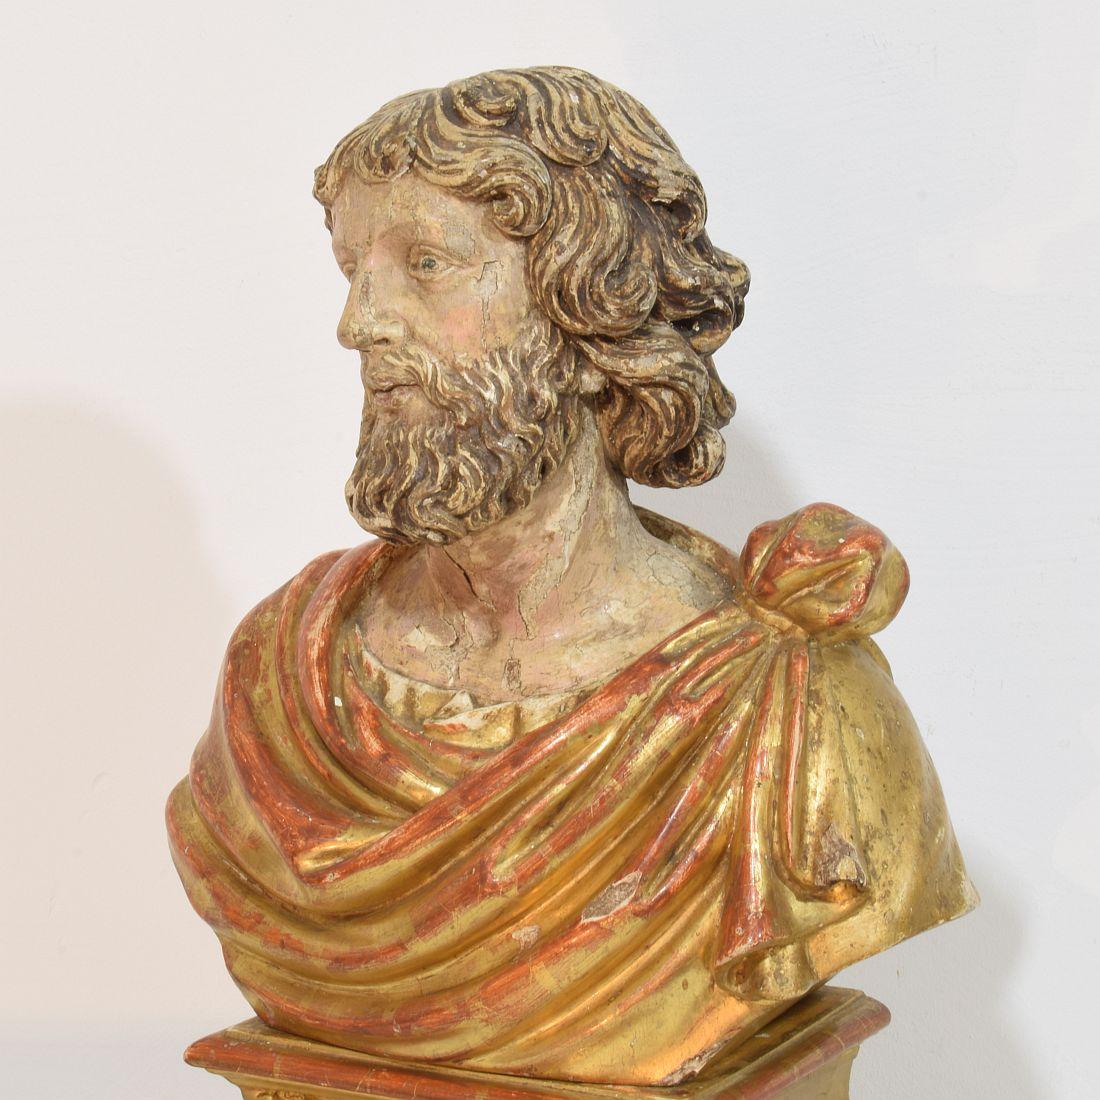 17th-18th Century Italian Hand carved Wooden Reliquary Bust of a Saint For Sale 2